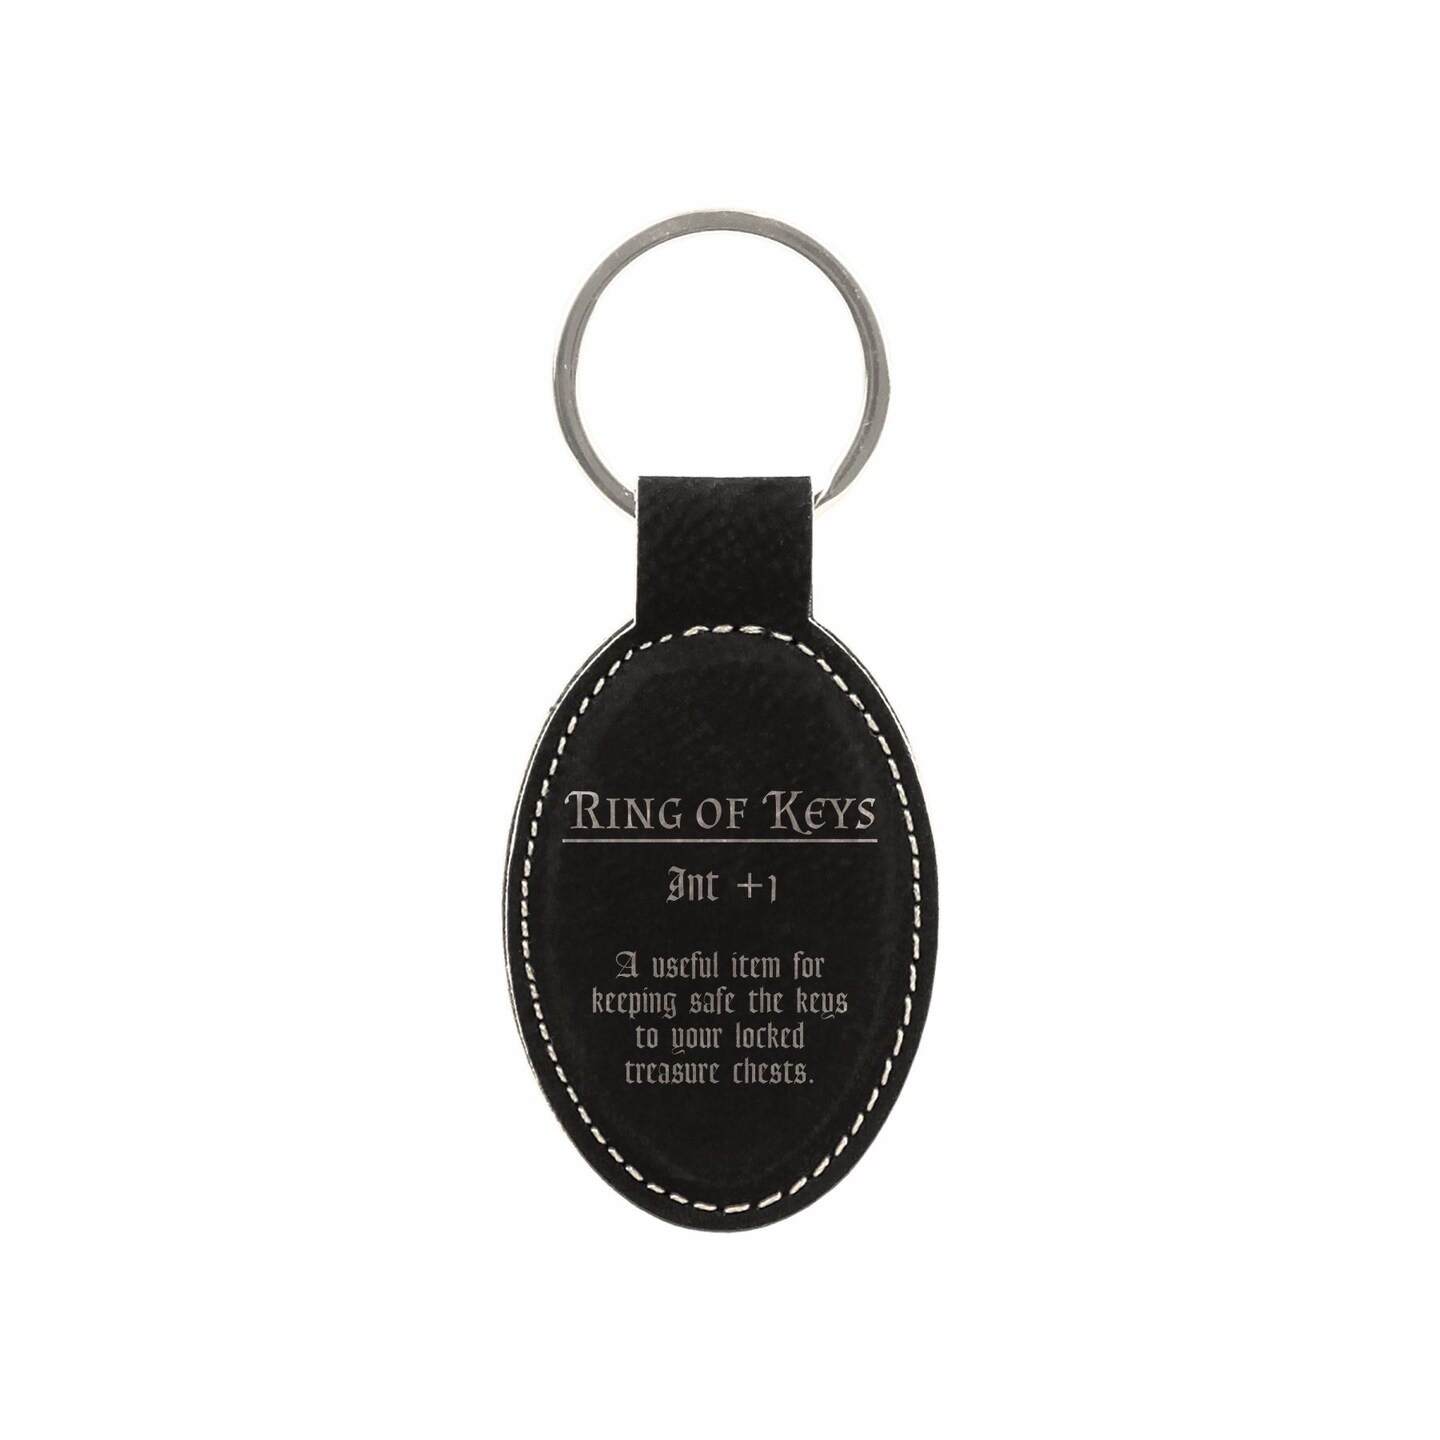 Dnd Keychain Ring of Keys Funny Item Description Dungeons Dragons Engraved  Leatherette Oval Key Tag Ring Gifts for Men Women (LKC-033)